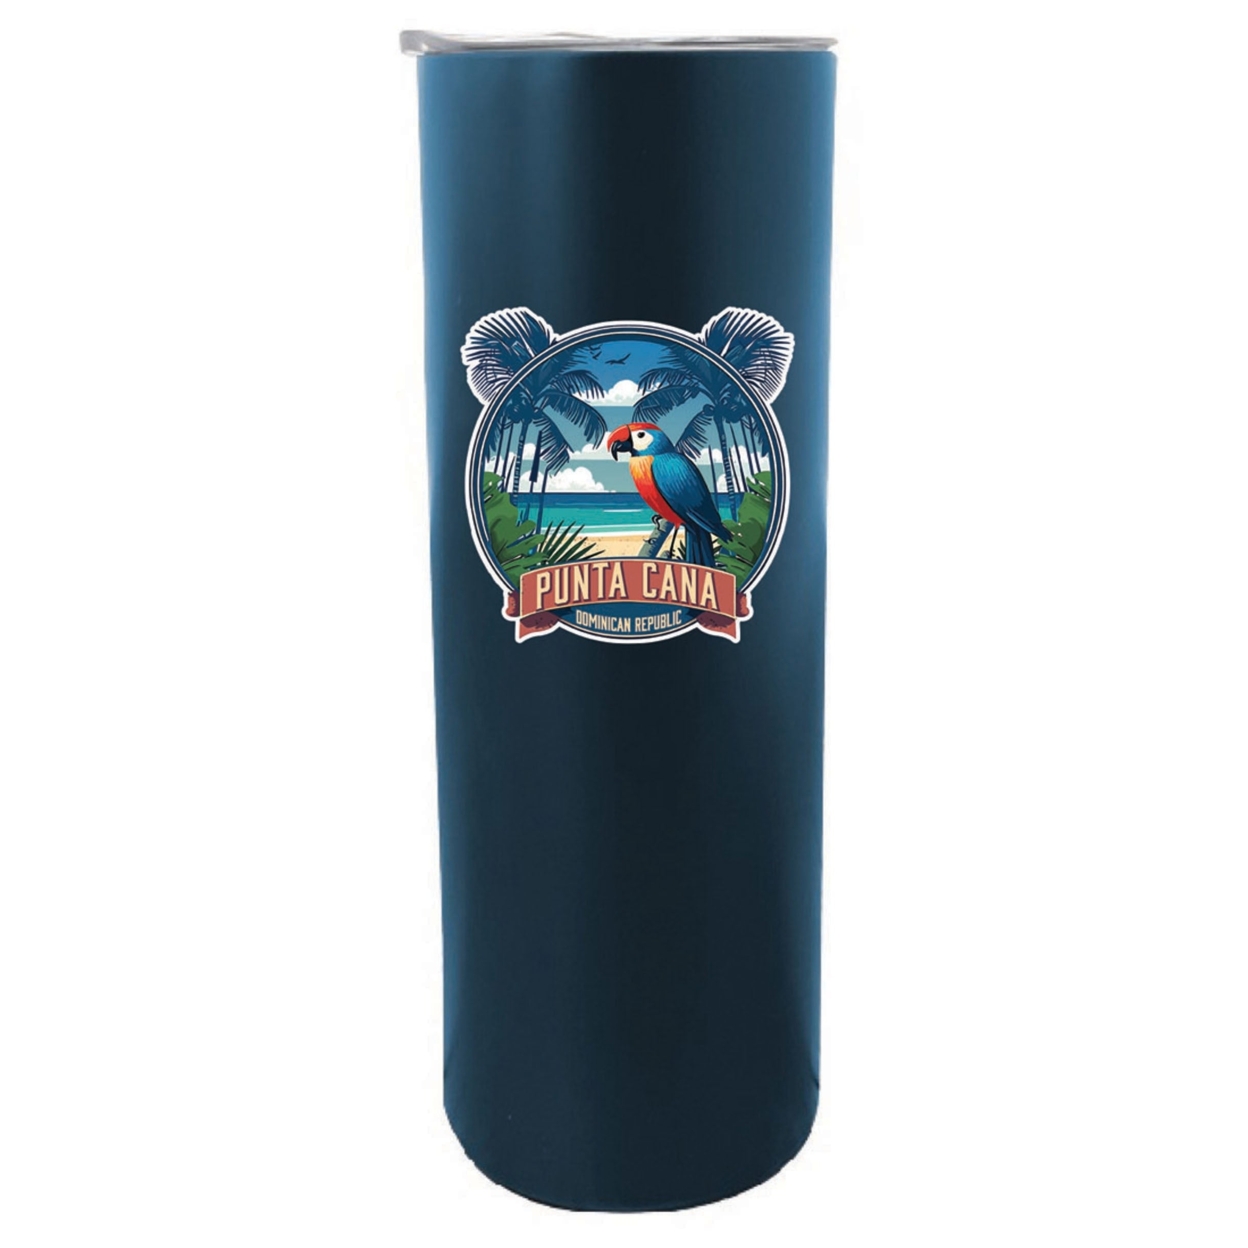 Punta Cana Dominican Republic Souvenir 20 Oz Insulated Stainless Steel Skinny Tumbler - Navy, PARROT B